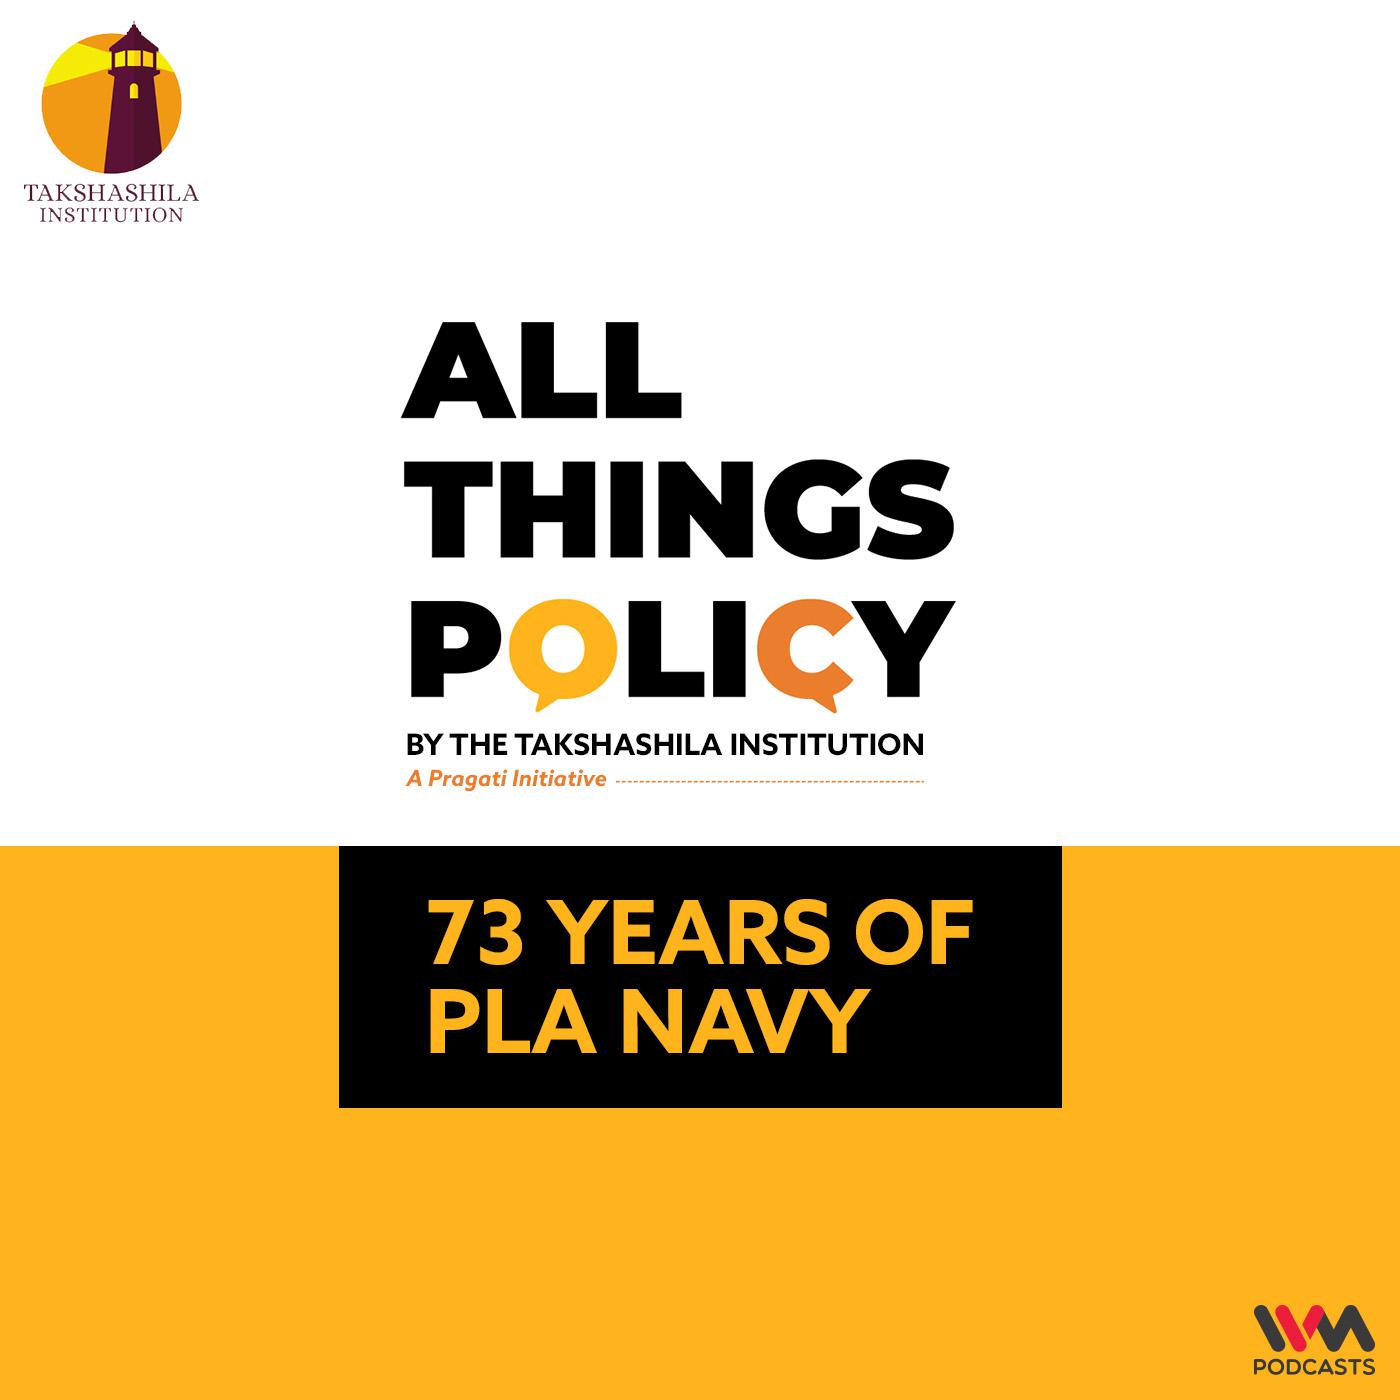 73 Years of PLA Navy